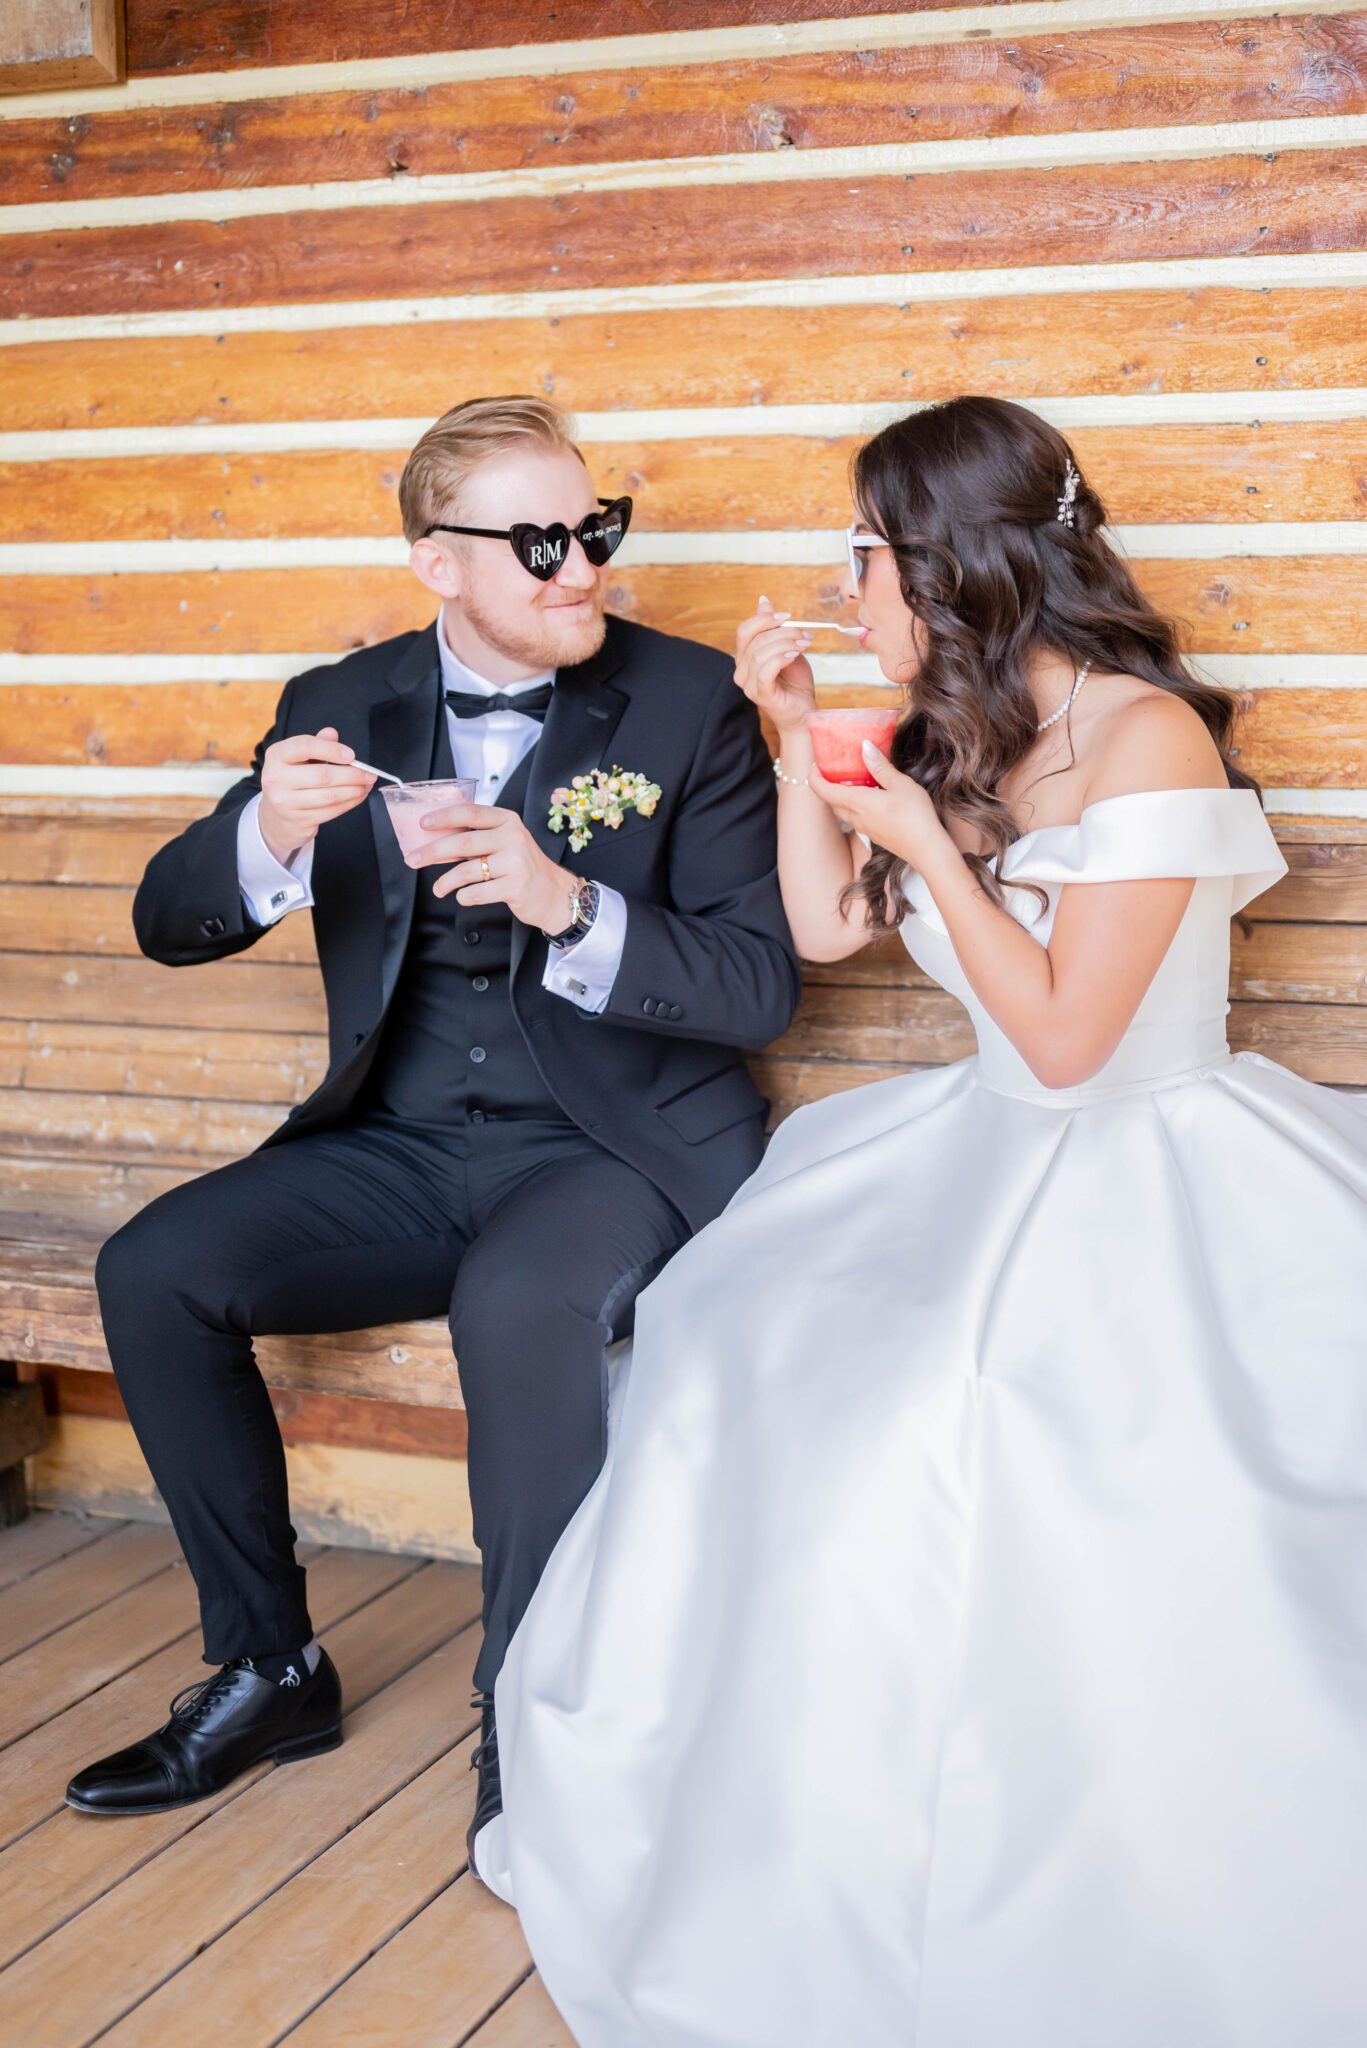 Bride and groom share icecream together at their whimsical garden wedding, featuring their heart-shaped custom sunglasses.